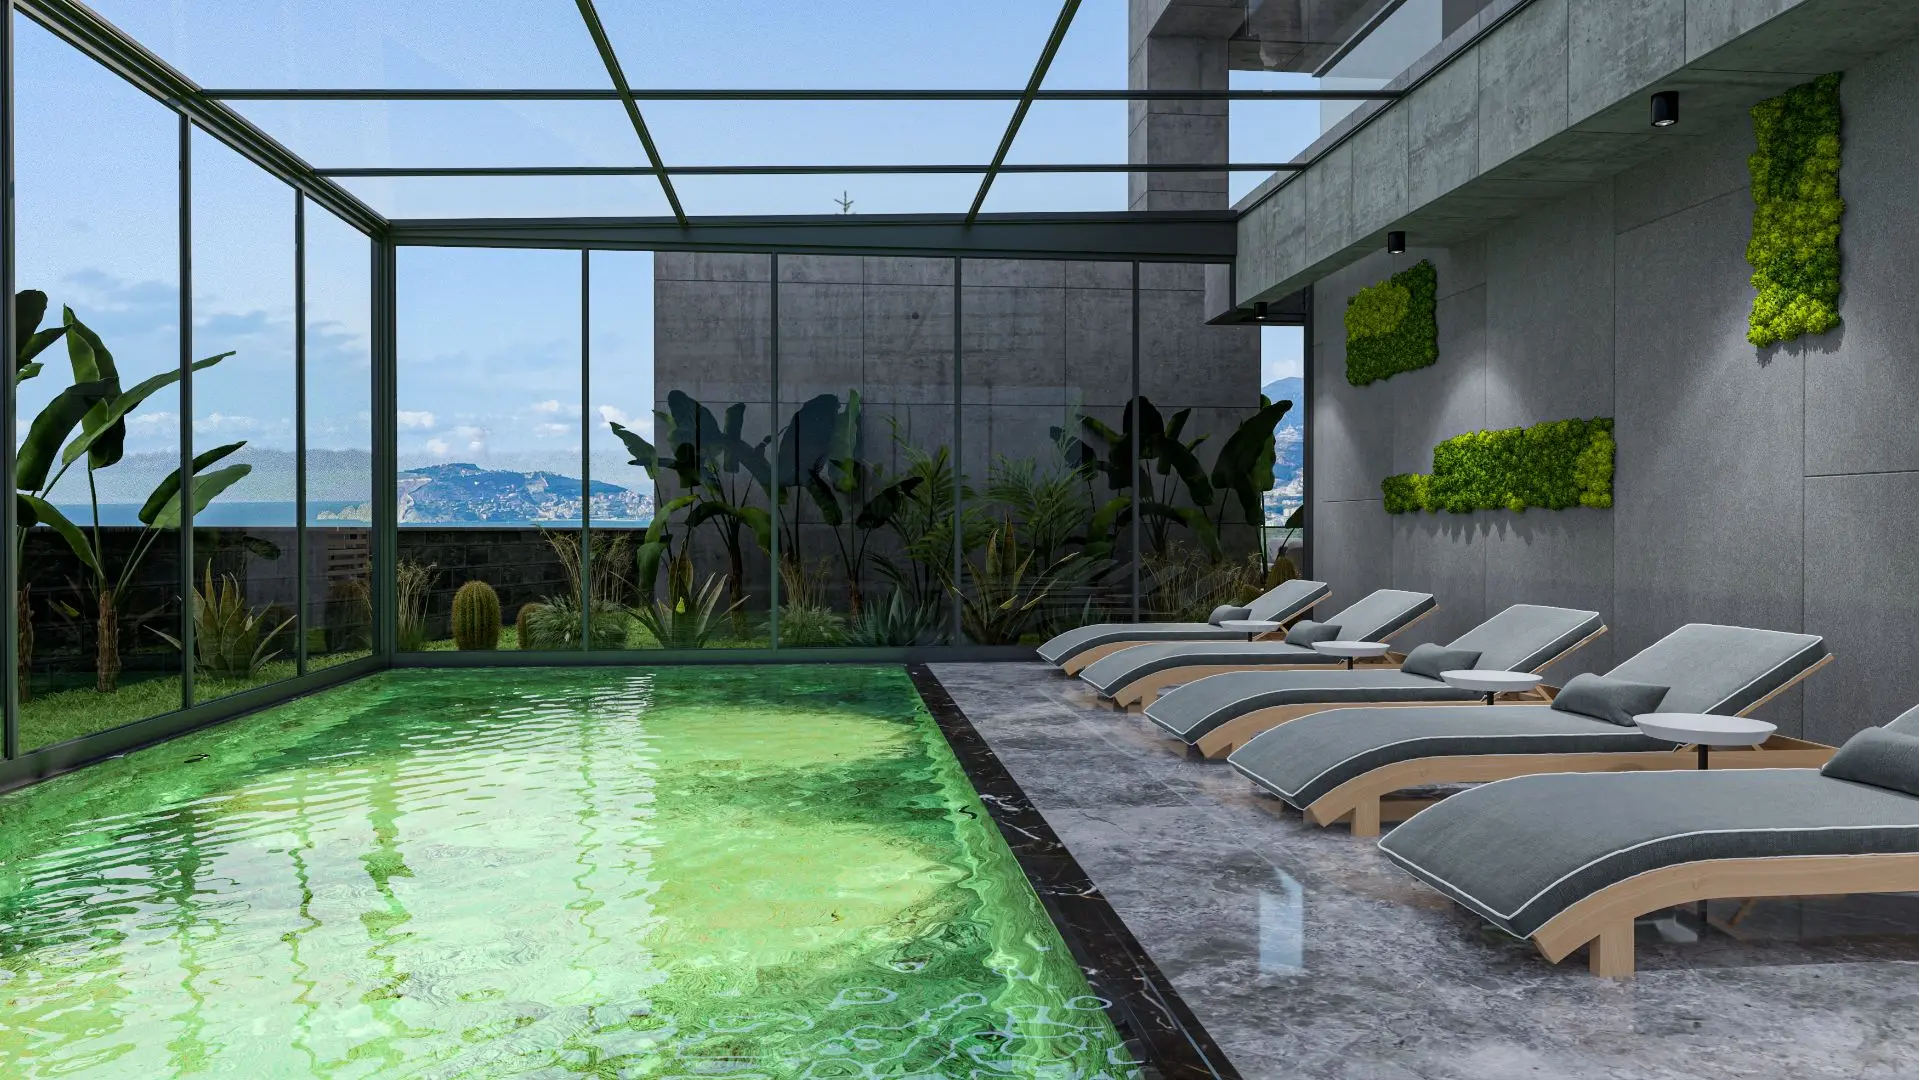 A LUXURIOUS PROJECT TO BE STARTED IN KESTEL, ALANYA